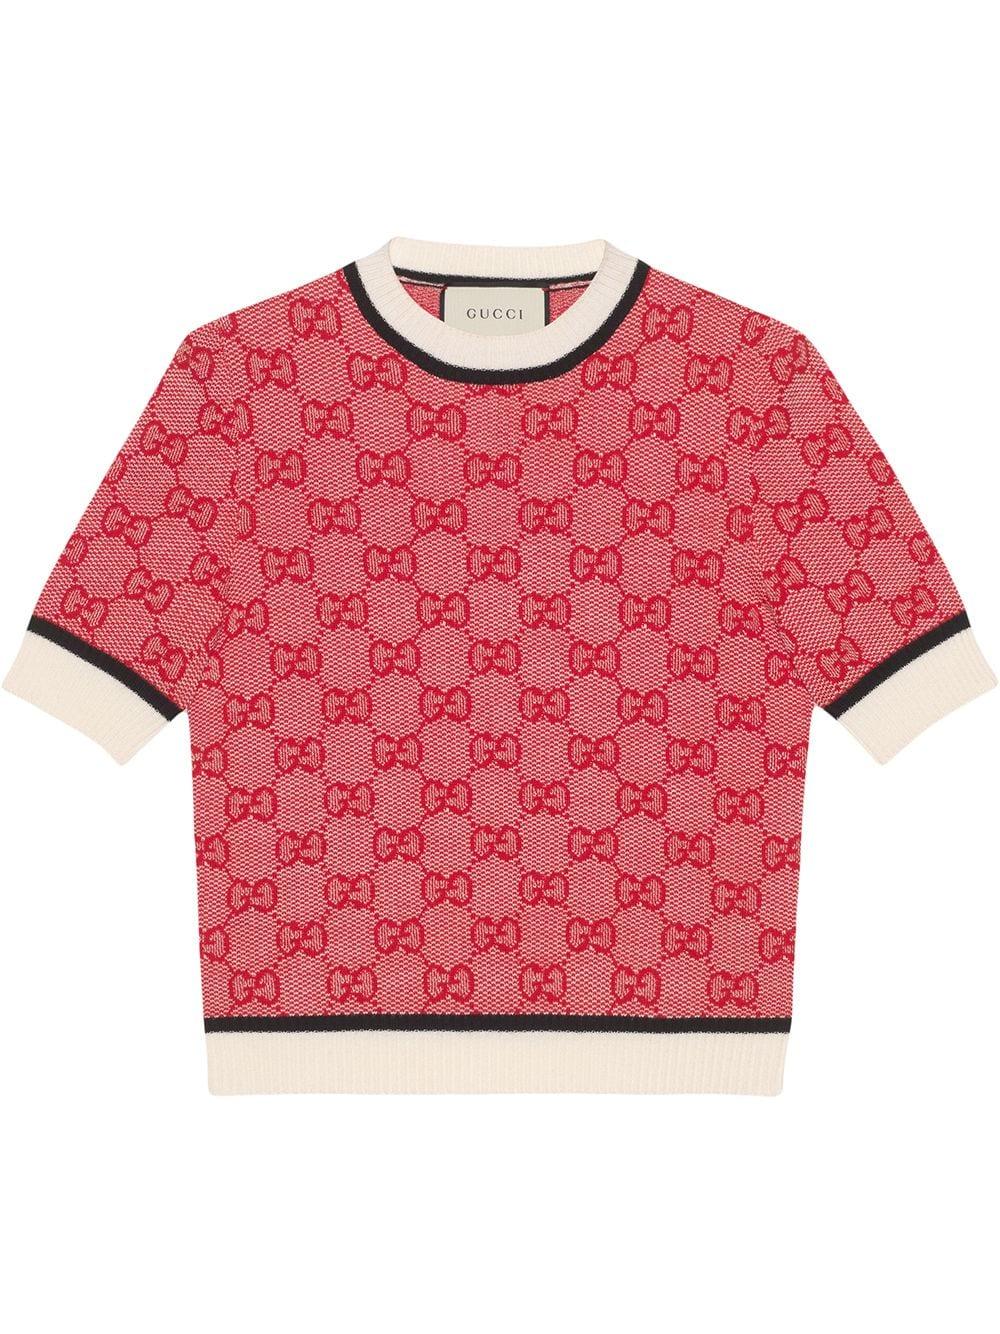 Gucci GG Knit Top in Red | Lyst